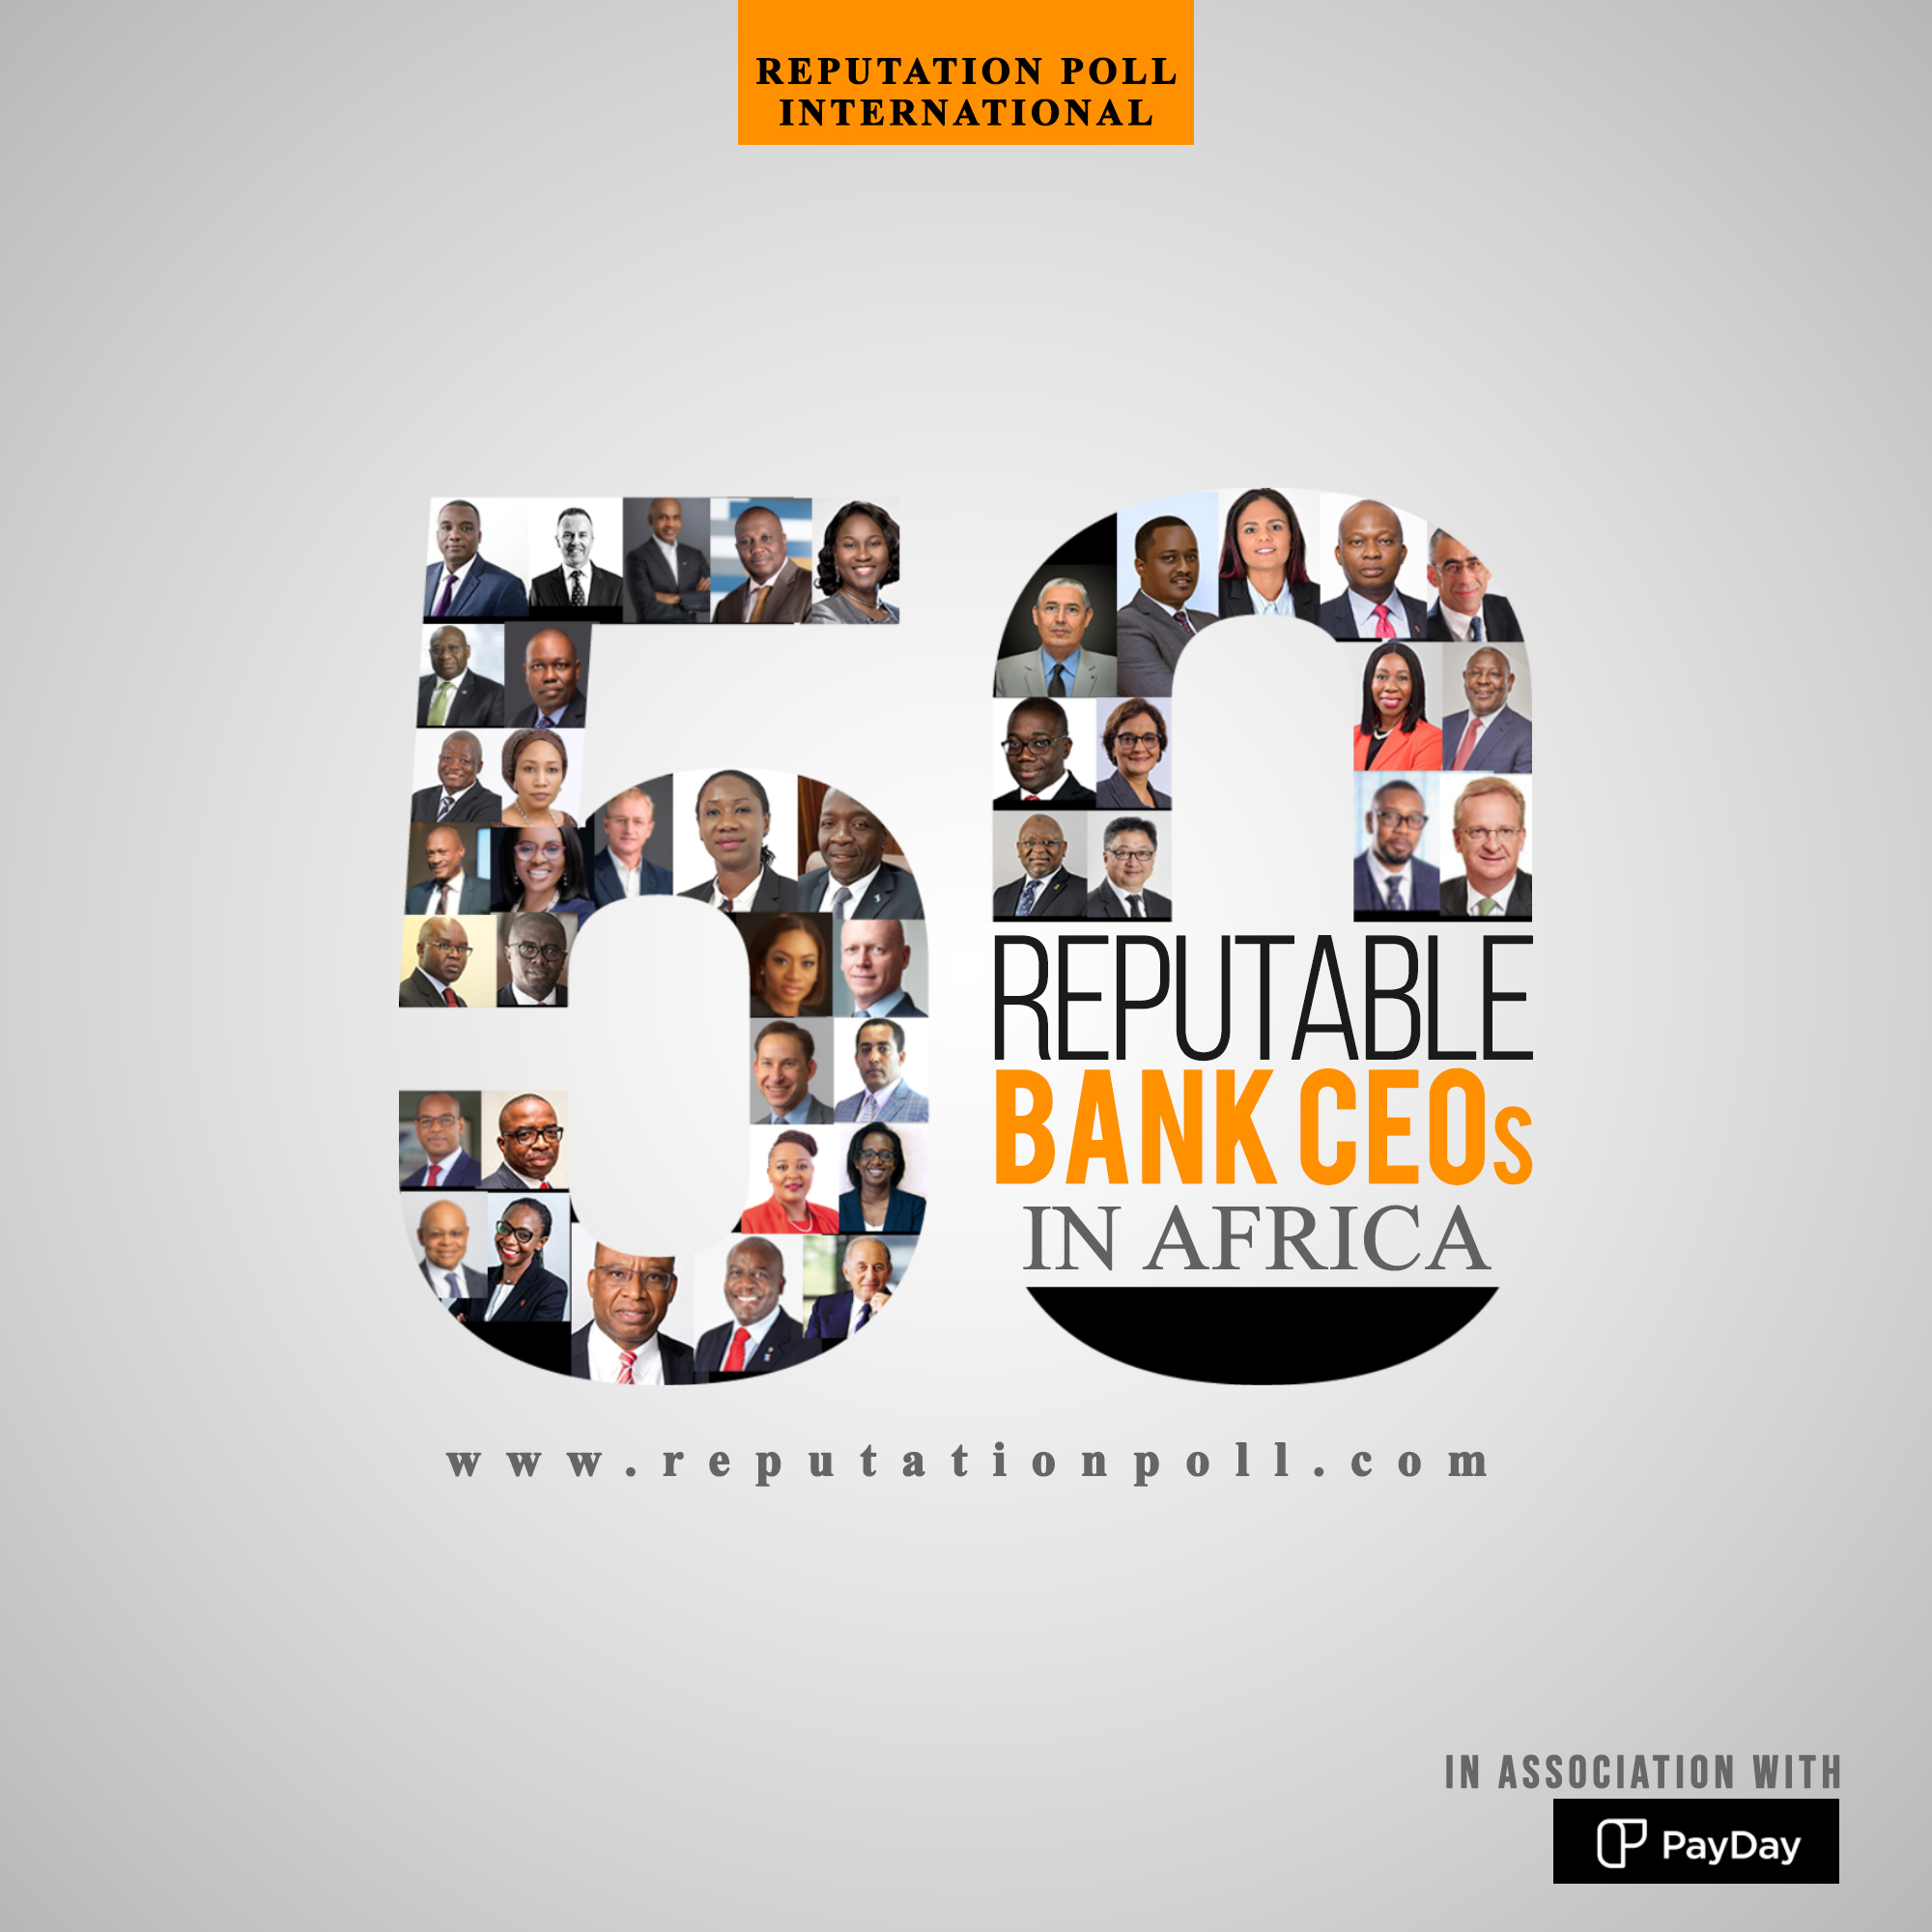 50 Most Reputable Bank CEOs in Africa